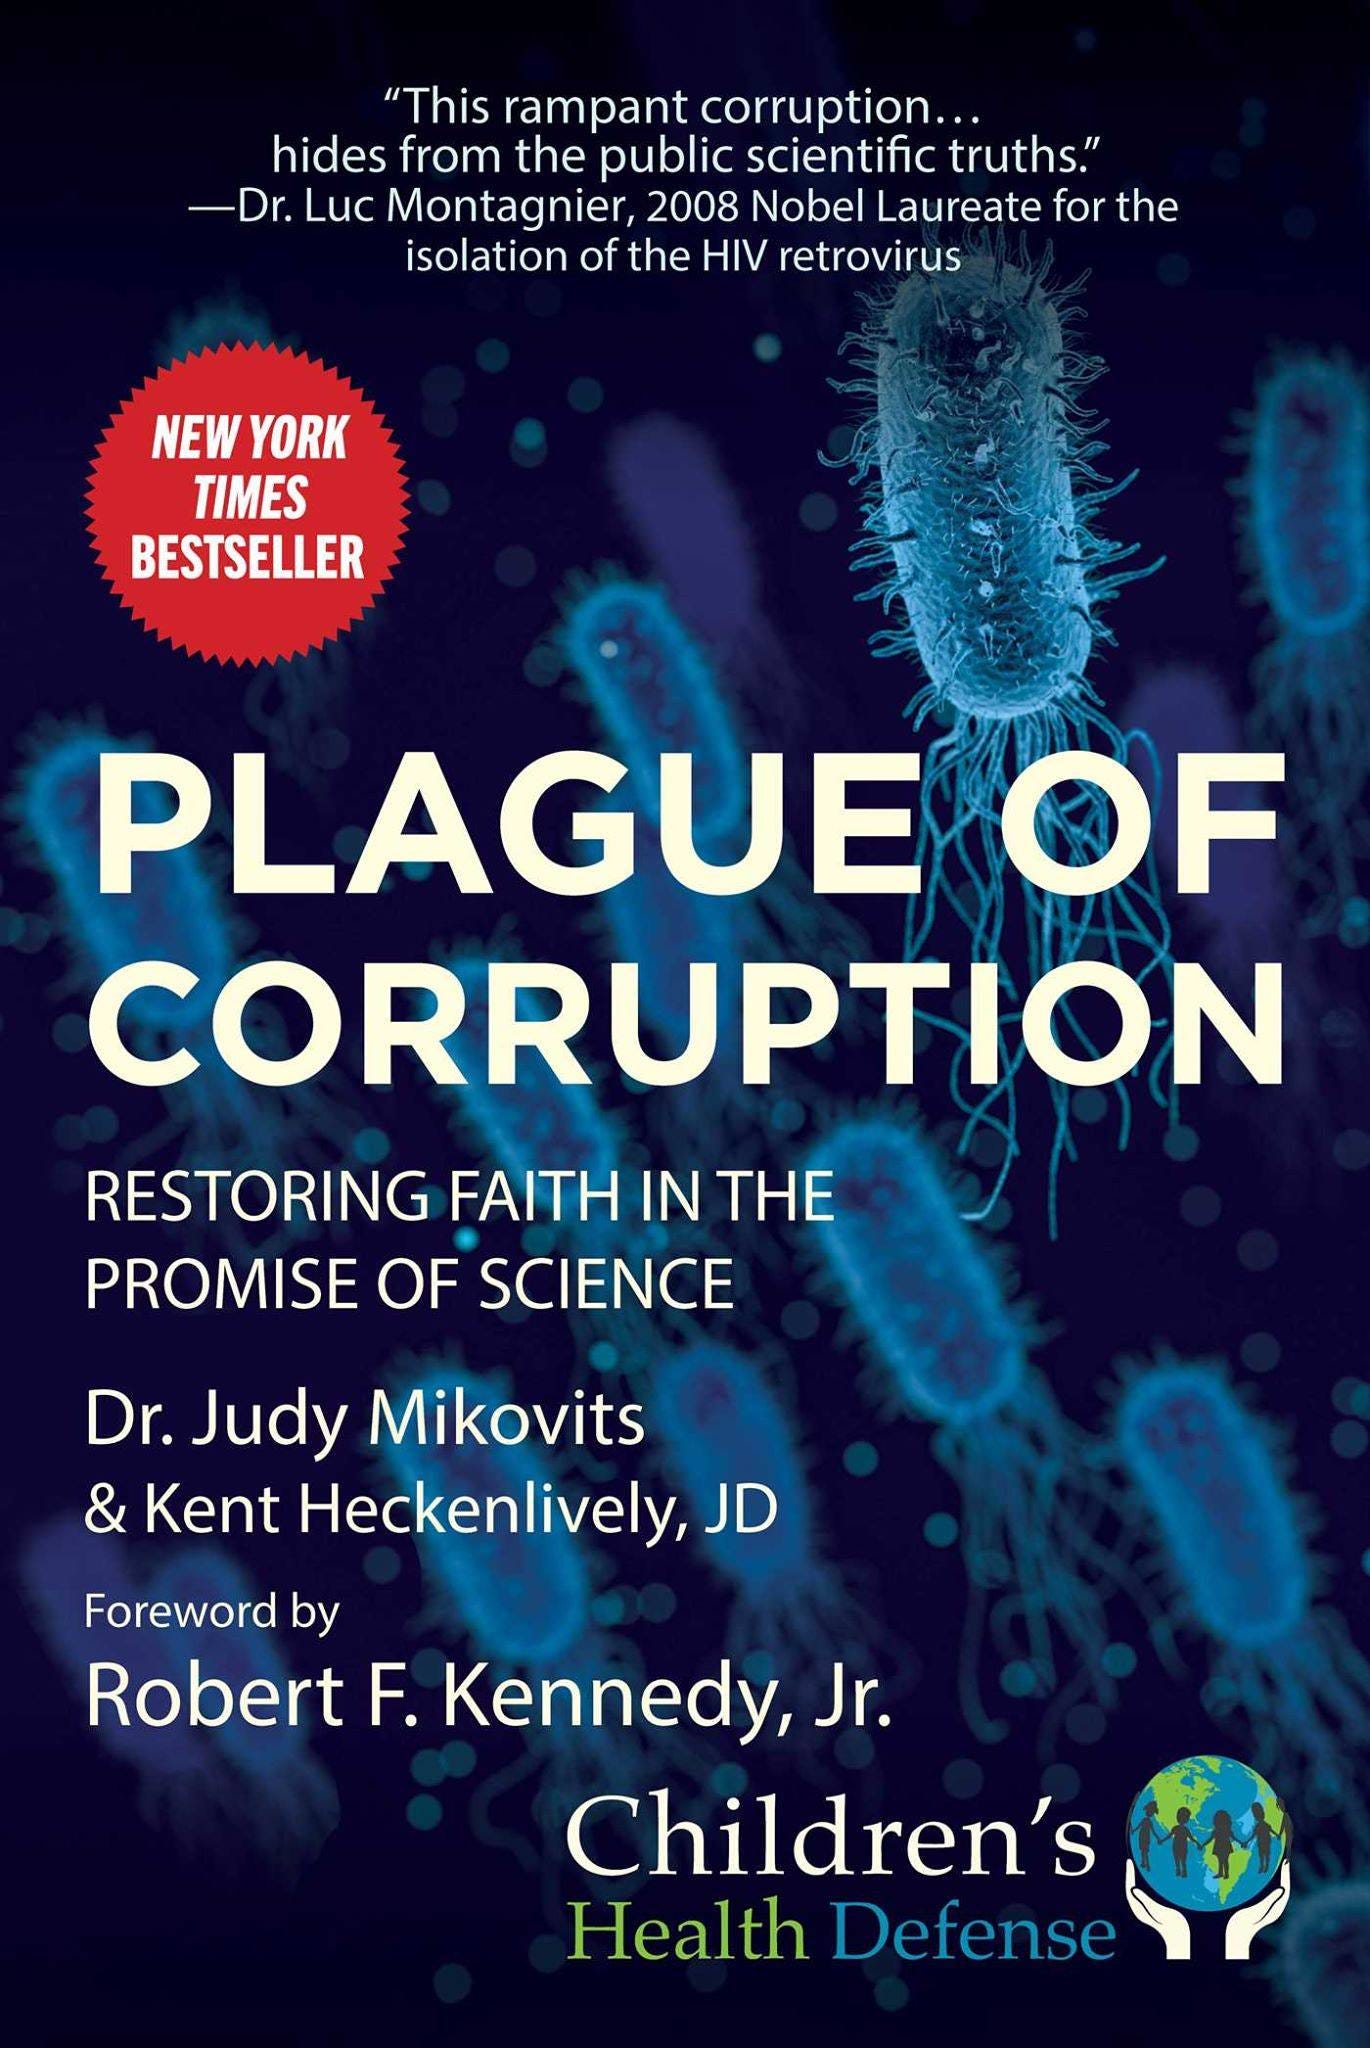 May be an image of text that says '"This ampant corruption... hides from the public scientific truths." -Dr. Luc Montagnier, 2008 Nobel Laureate for the isolation of the HIV retrovirus NEW YORK TIMES BESTSELLER PLAGUE OF CORRUPTION RESTORING FAITH IN THE PROMISE OF SCIENCE Dr. Judy Mikovits & Kent Heckenlively, JD Foreword by Robert F. Kennedy, Jr. Children's Health Defense'